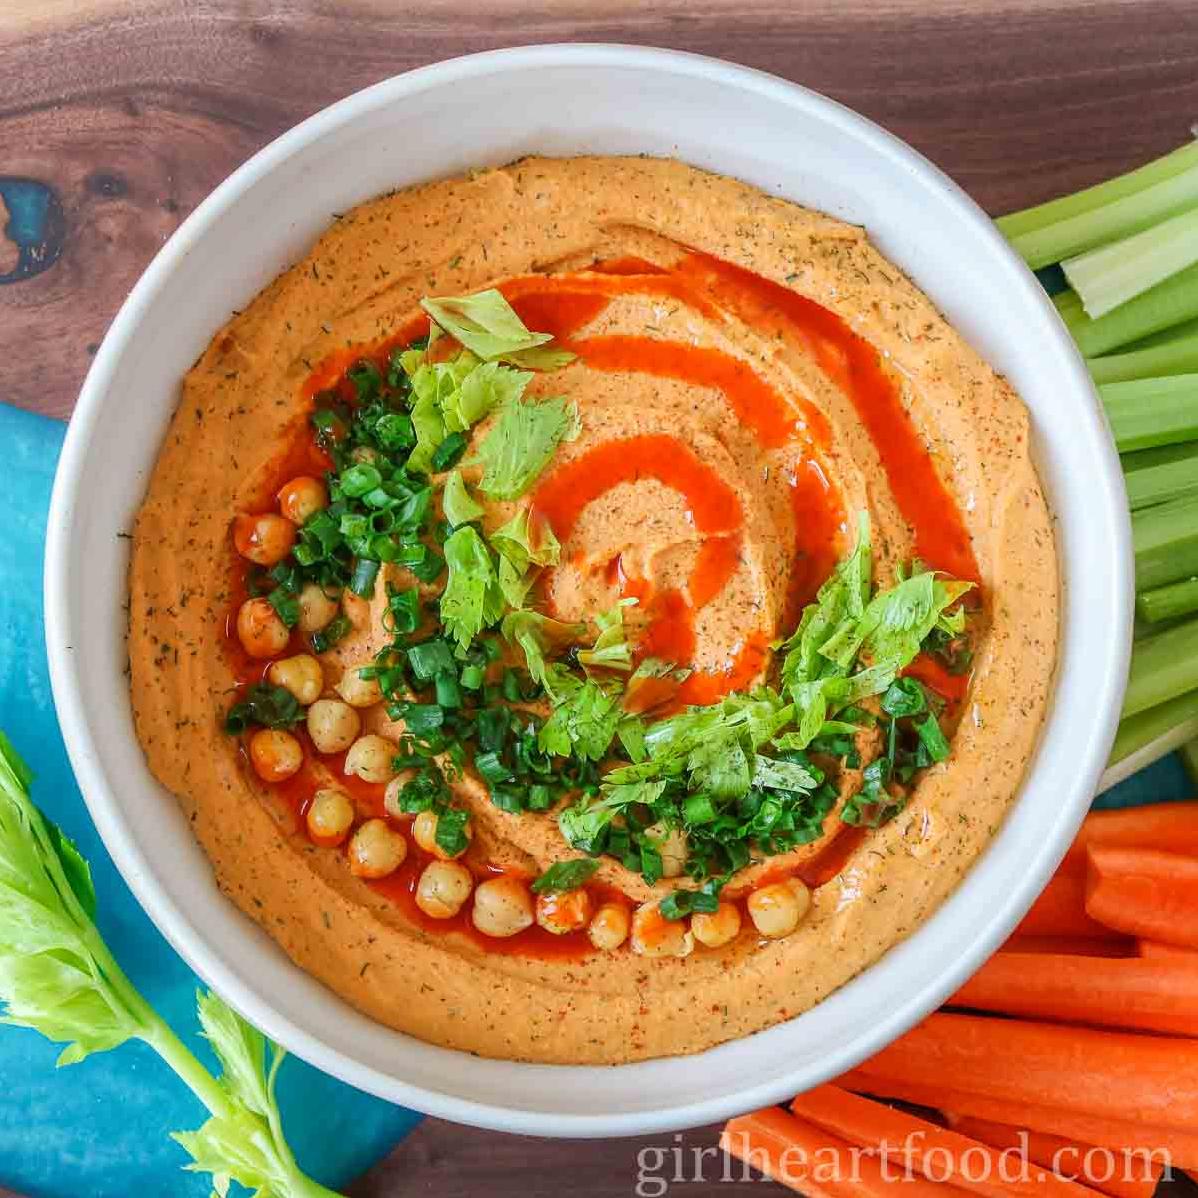  Fuel your spicy cravings with this amazing twist on classic hummus.